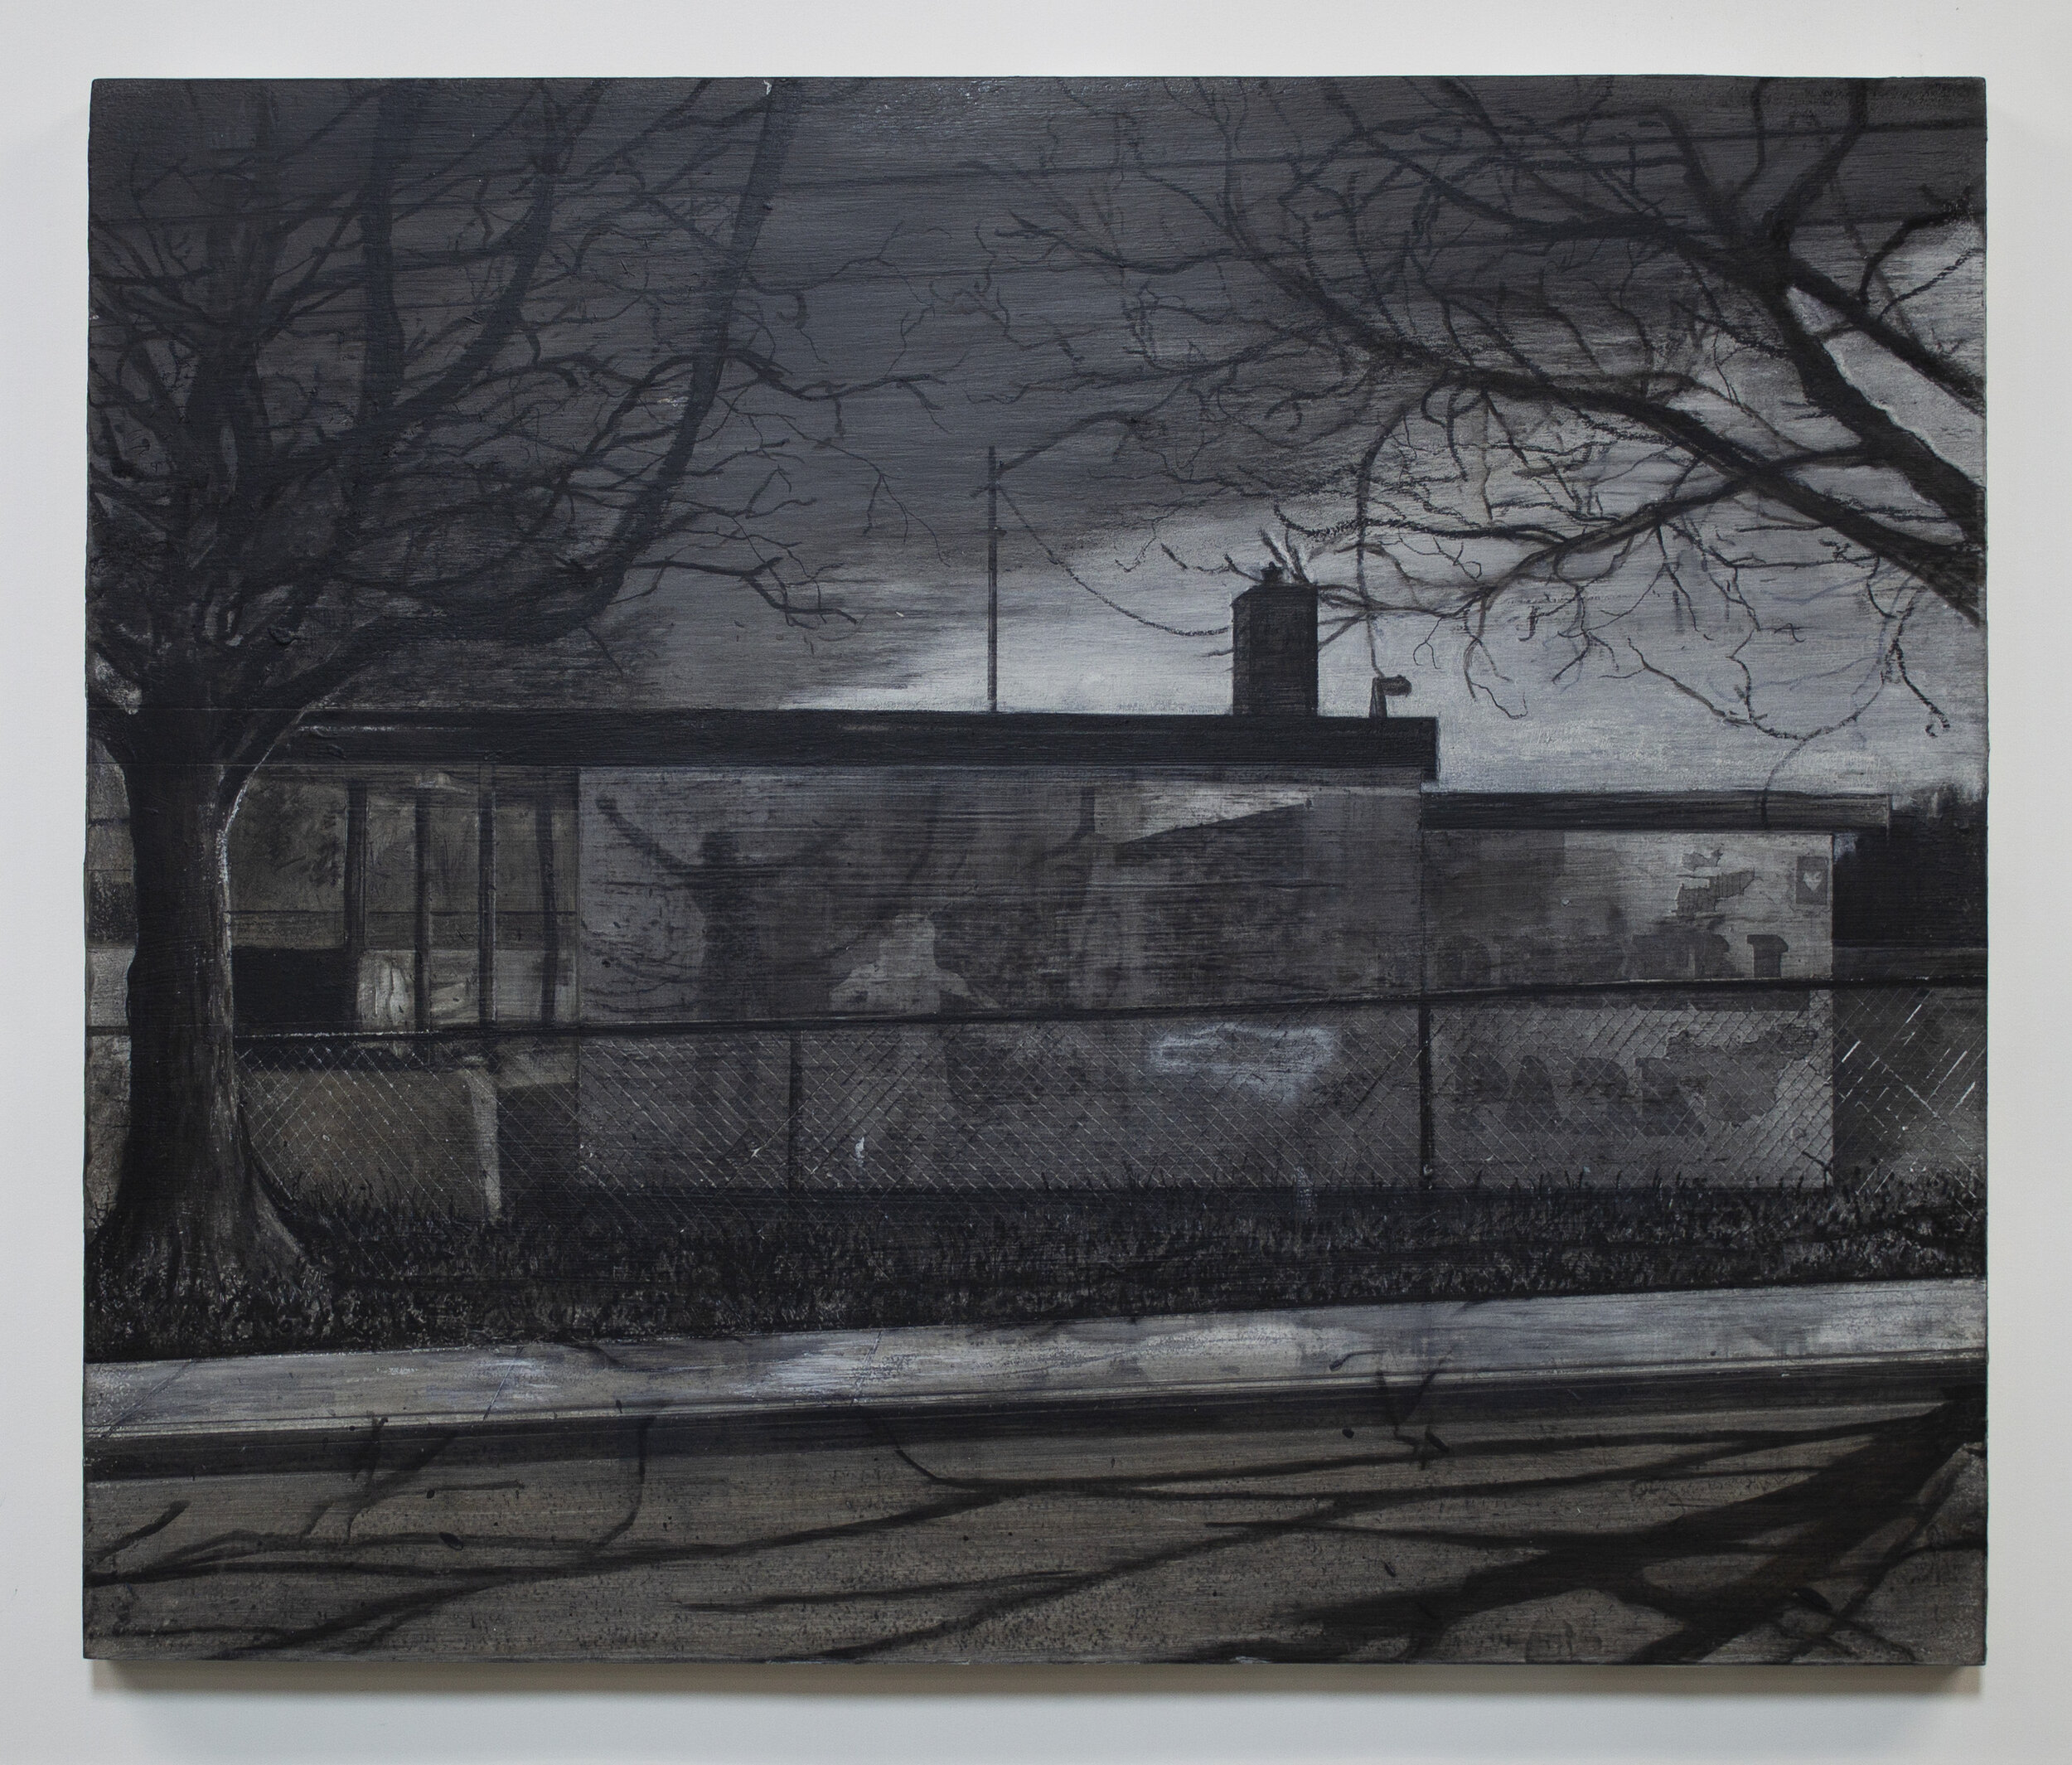  Tolley Park #1  2019 / 24"x20"  Acrylic, Charcoal, Digital Print, and Ink on wood Panel 